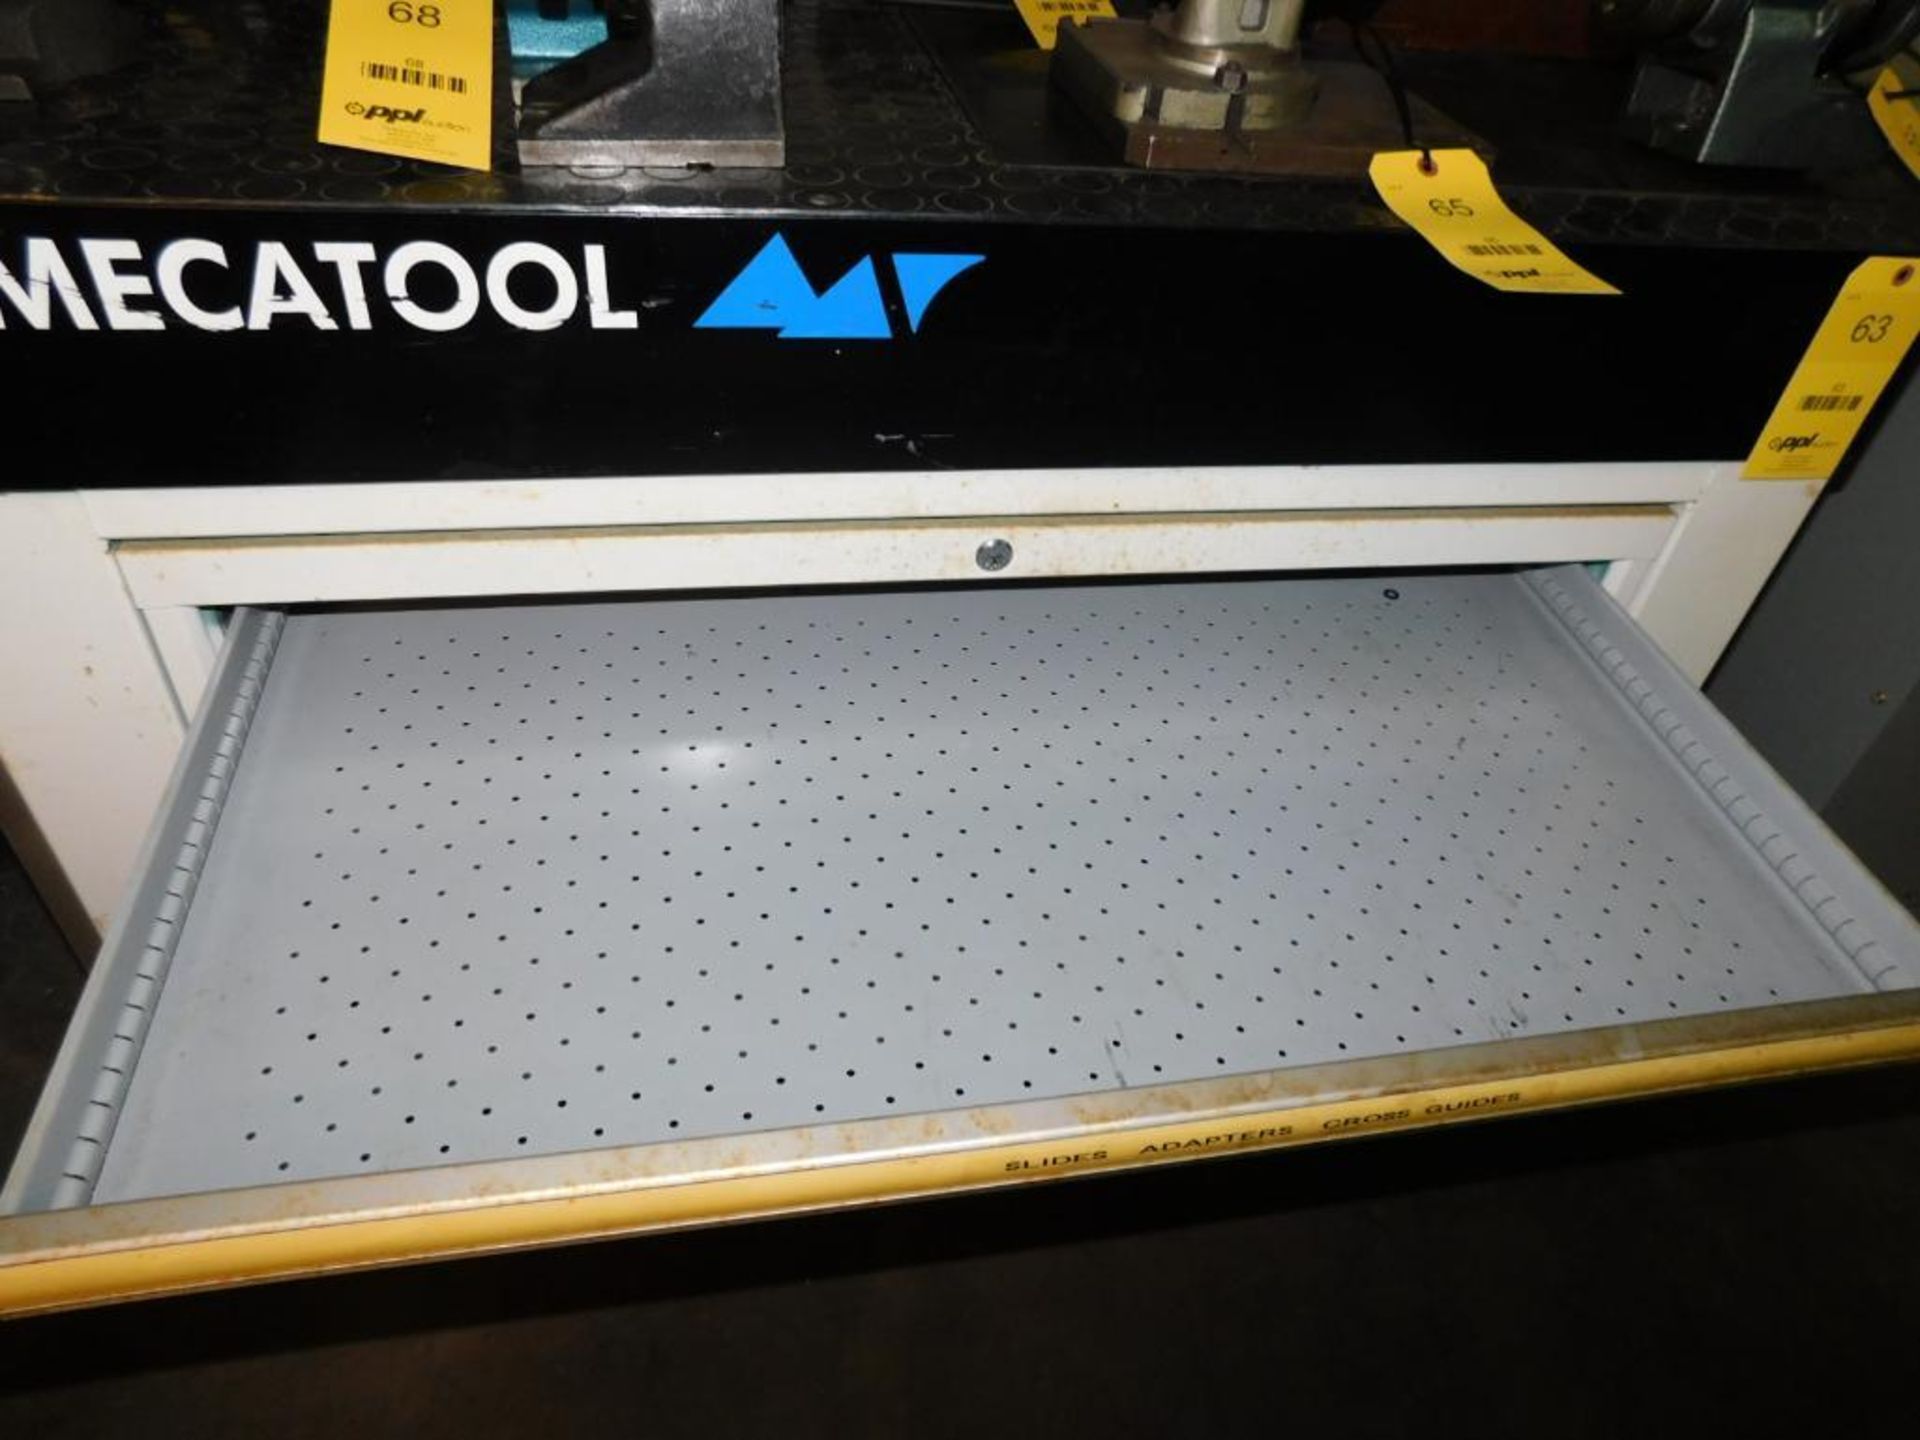 MecaTools 4-Drawer Rolling Tooling Cabinet w/24" x 16" Granite Plate on Top (EMPTY - NO CONTENTS) - Image 7 of 10